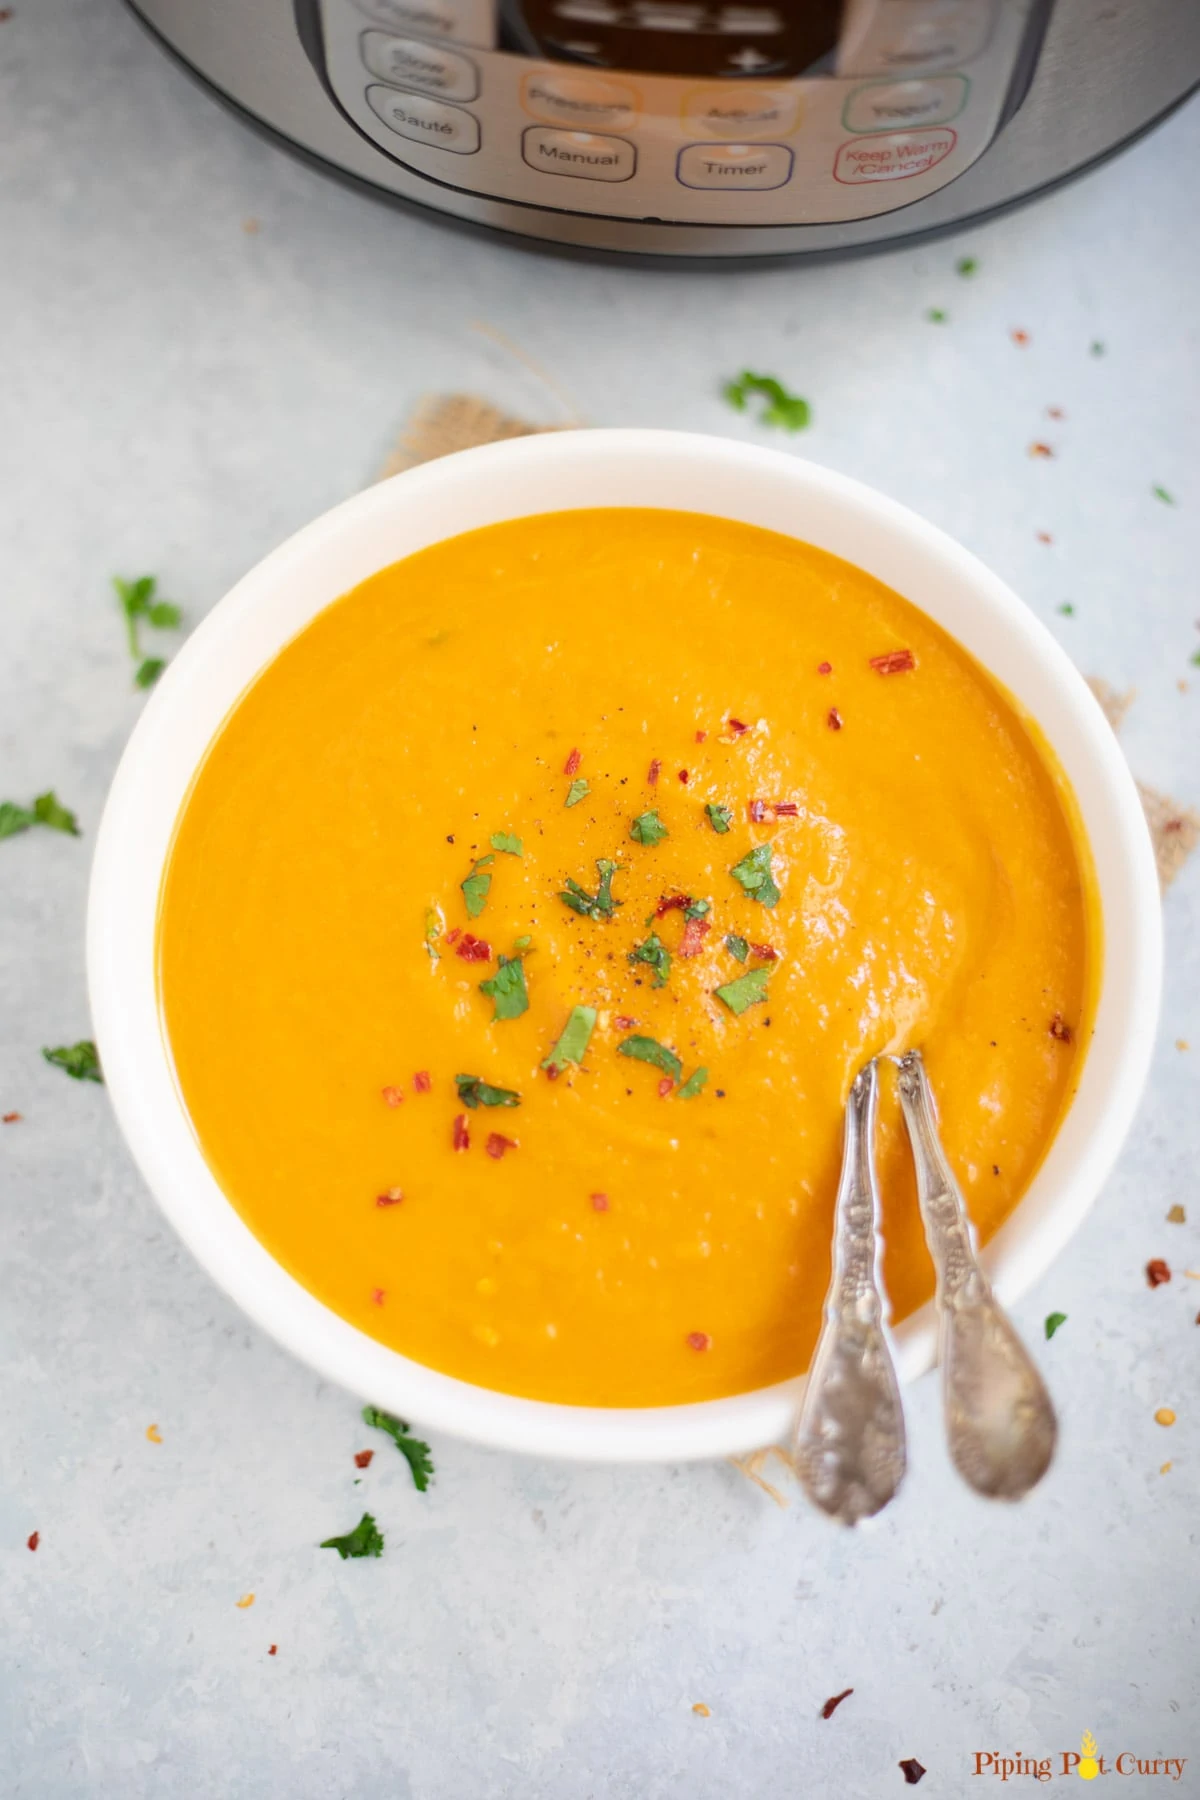 A bowl of carrot soup in front of the instant pot